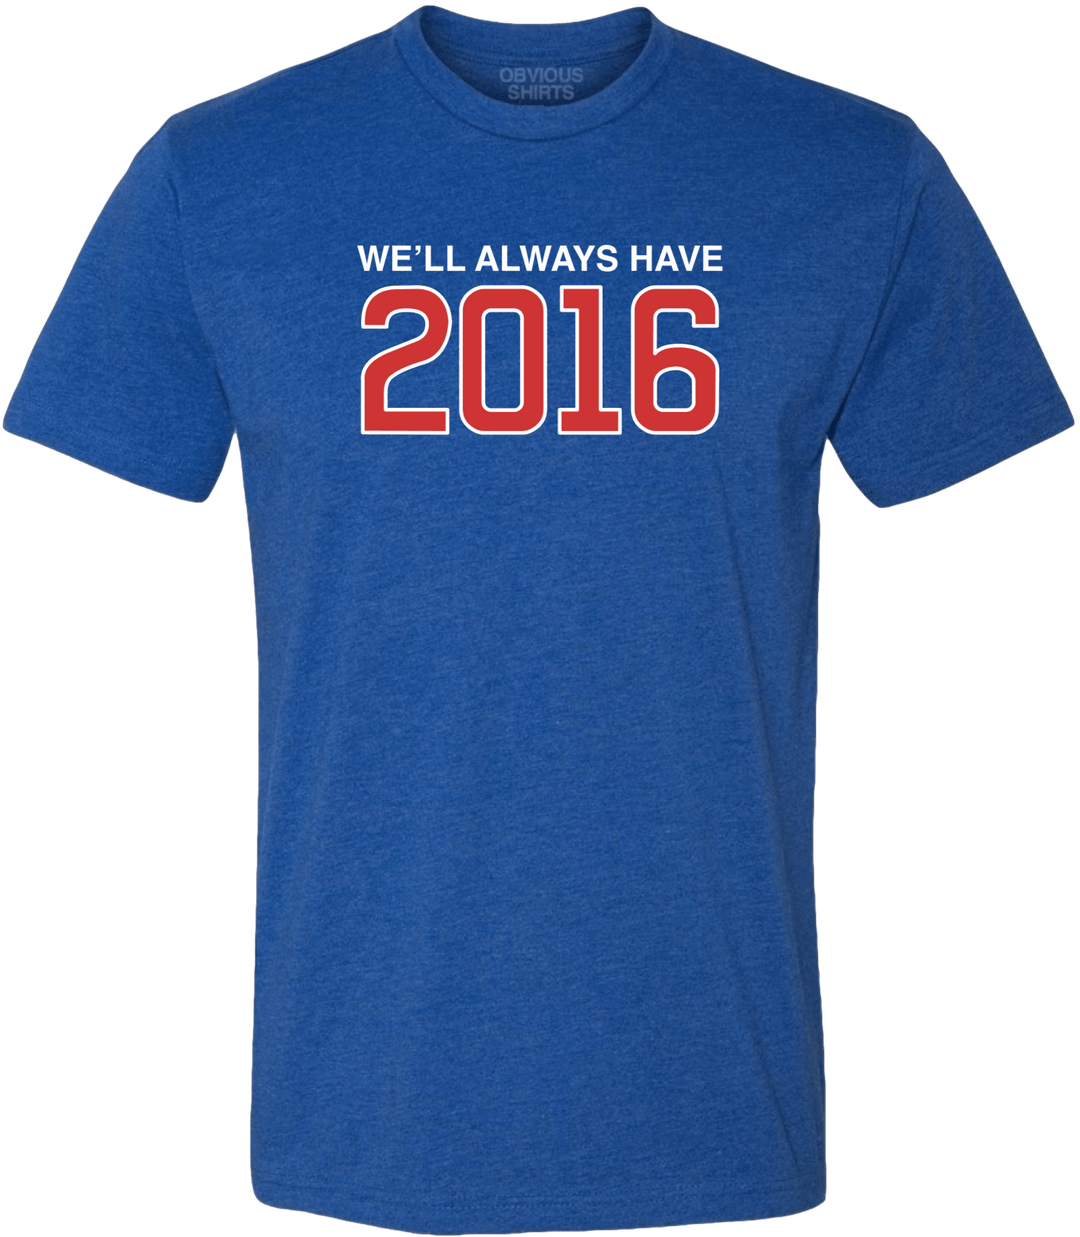 Chicago Cubs obvious Shirts Men's What If I Told You World Series Tee XL